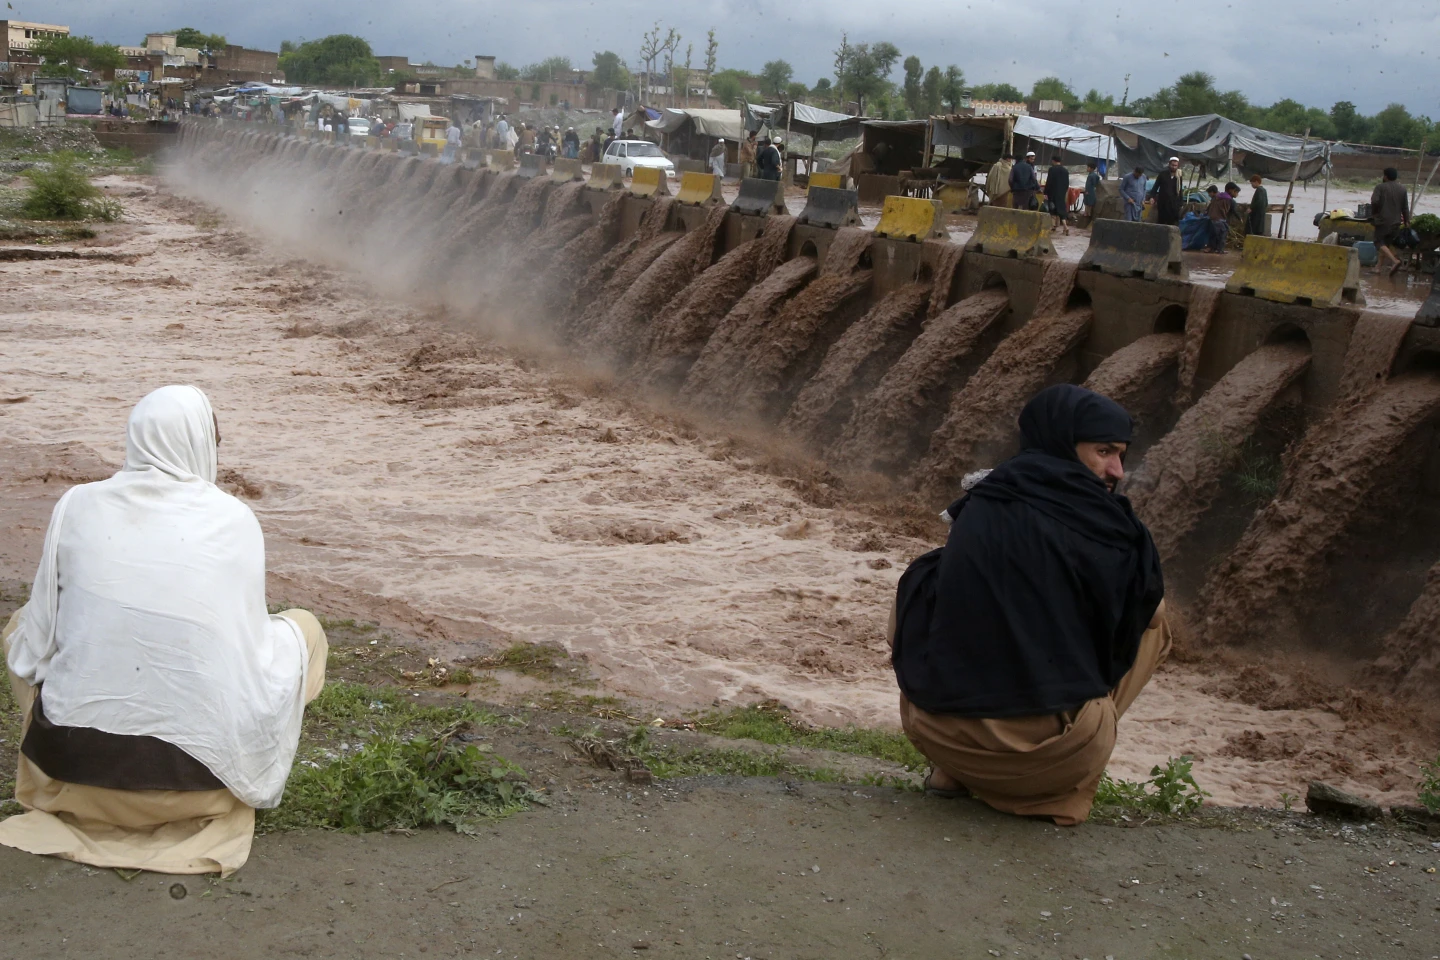 Death toll from 4 days of rains rises to 63 in Pakistan with more rain on the forecast